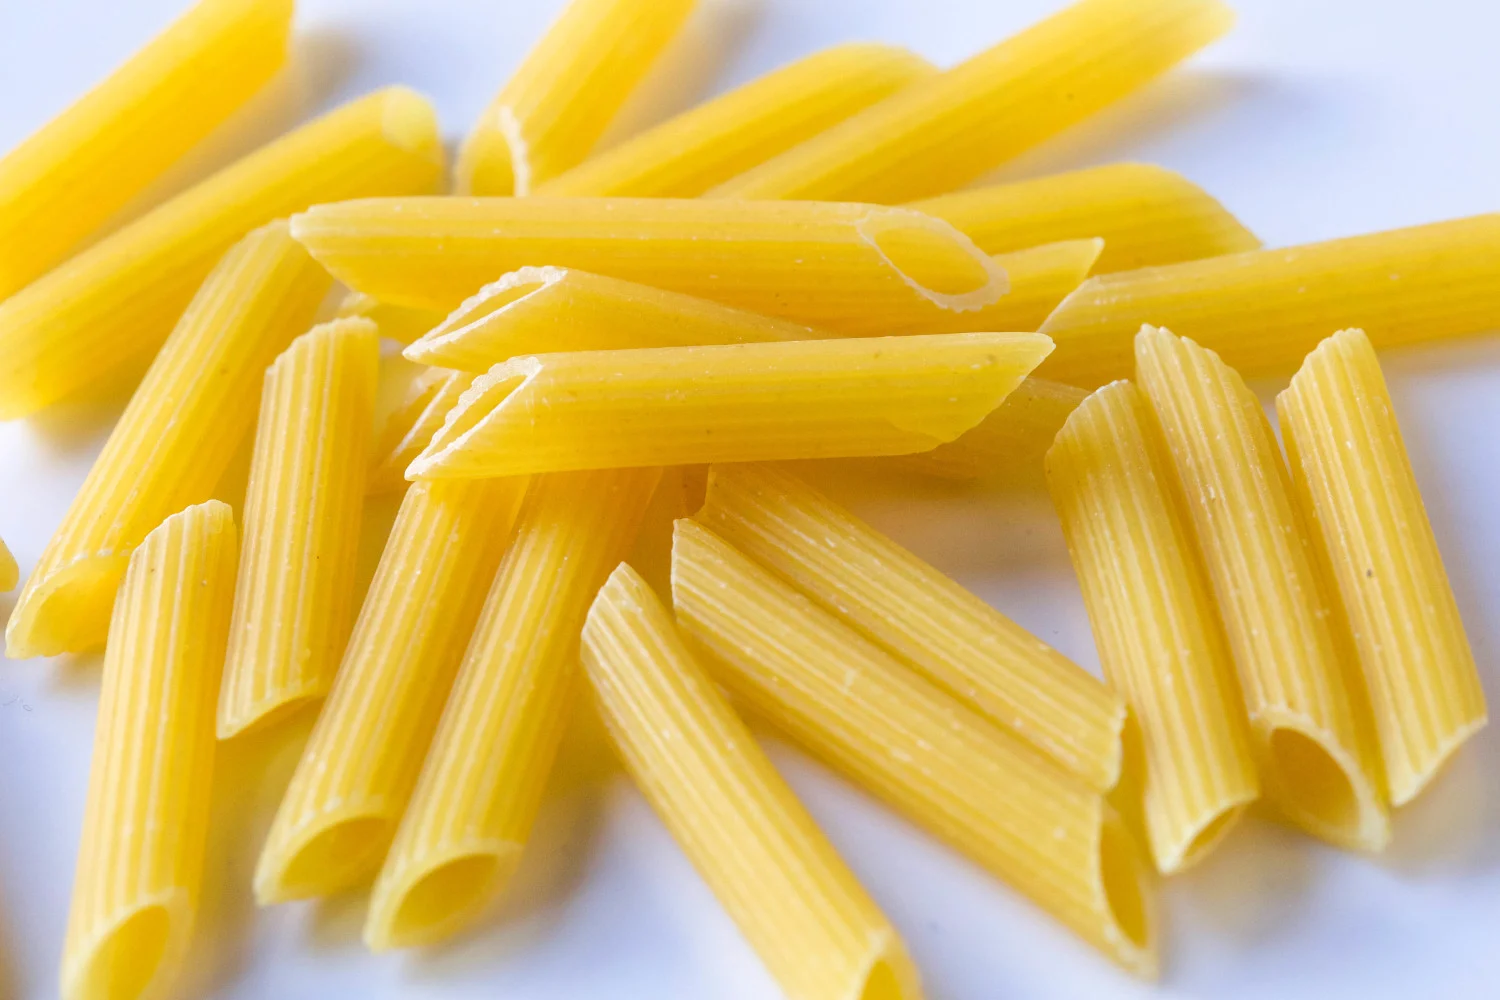 Which pasta shape is shaped like a small shell?